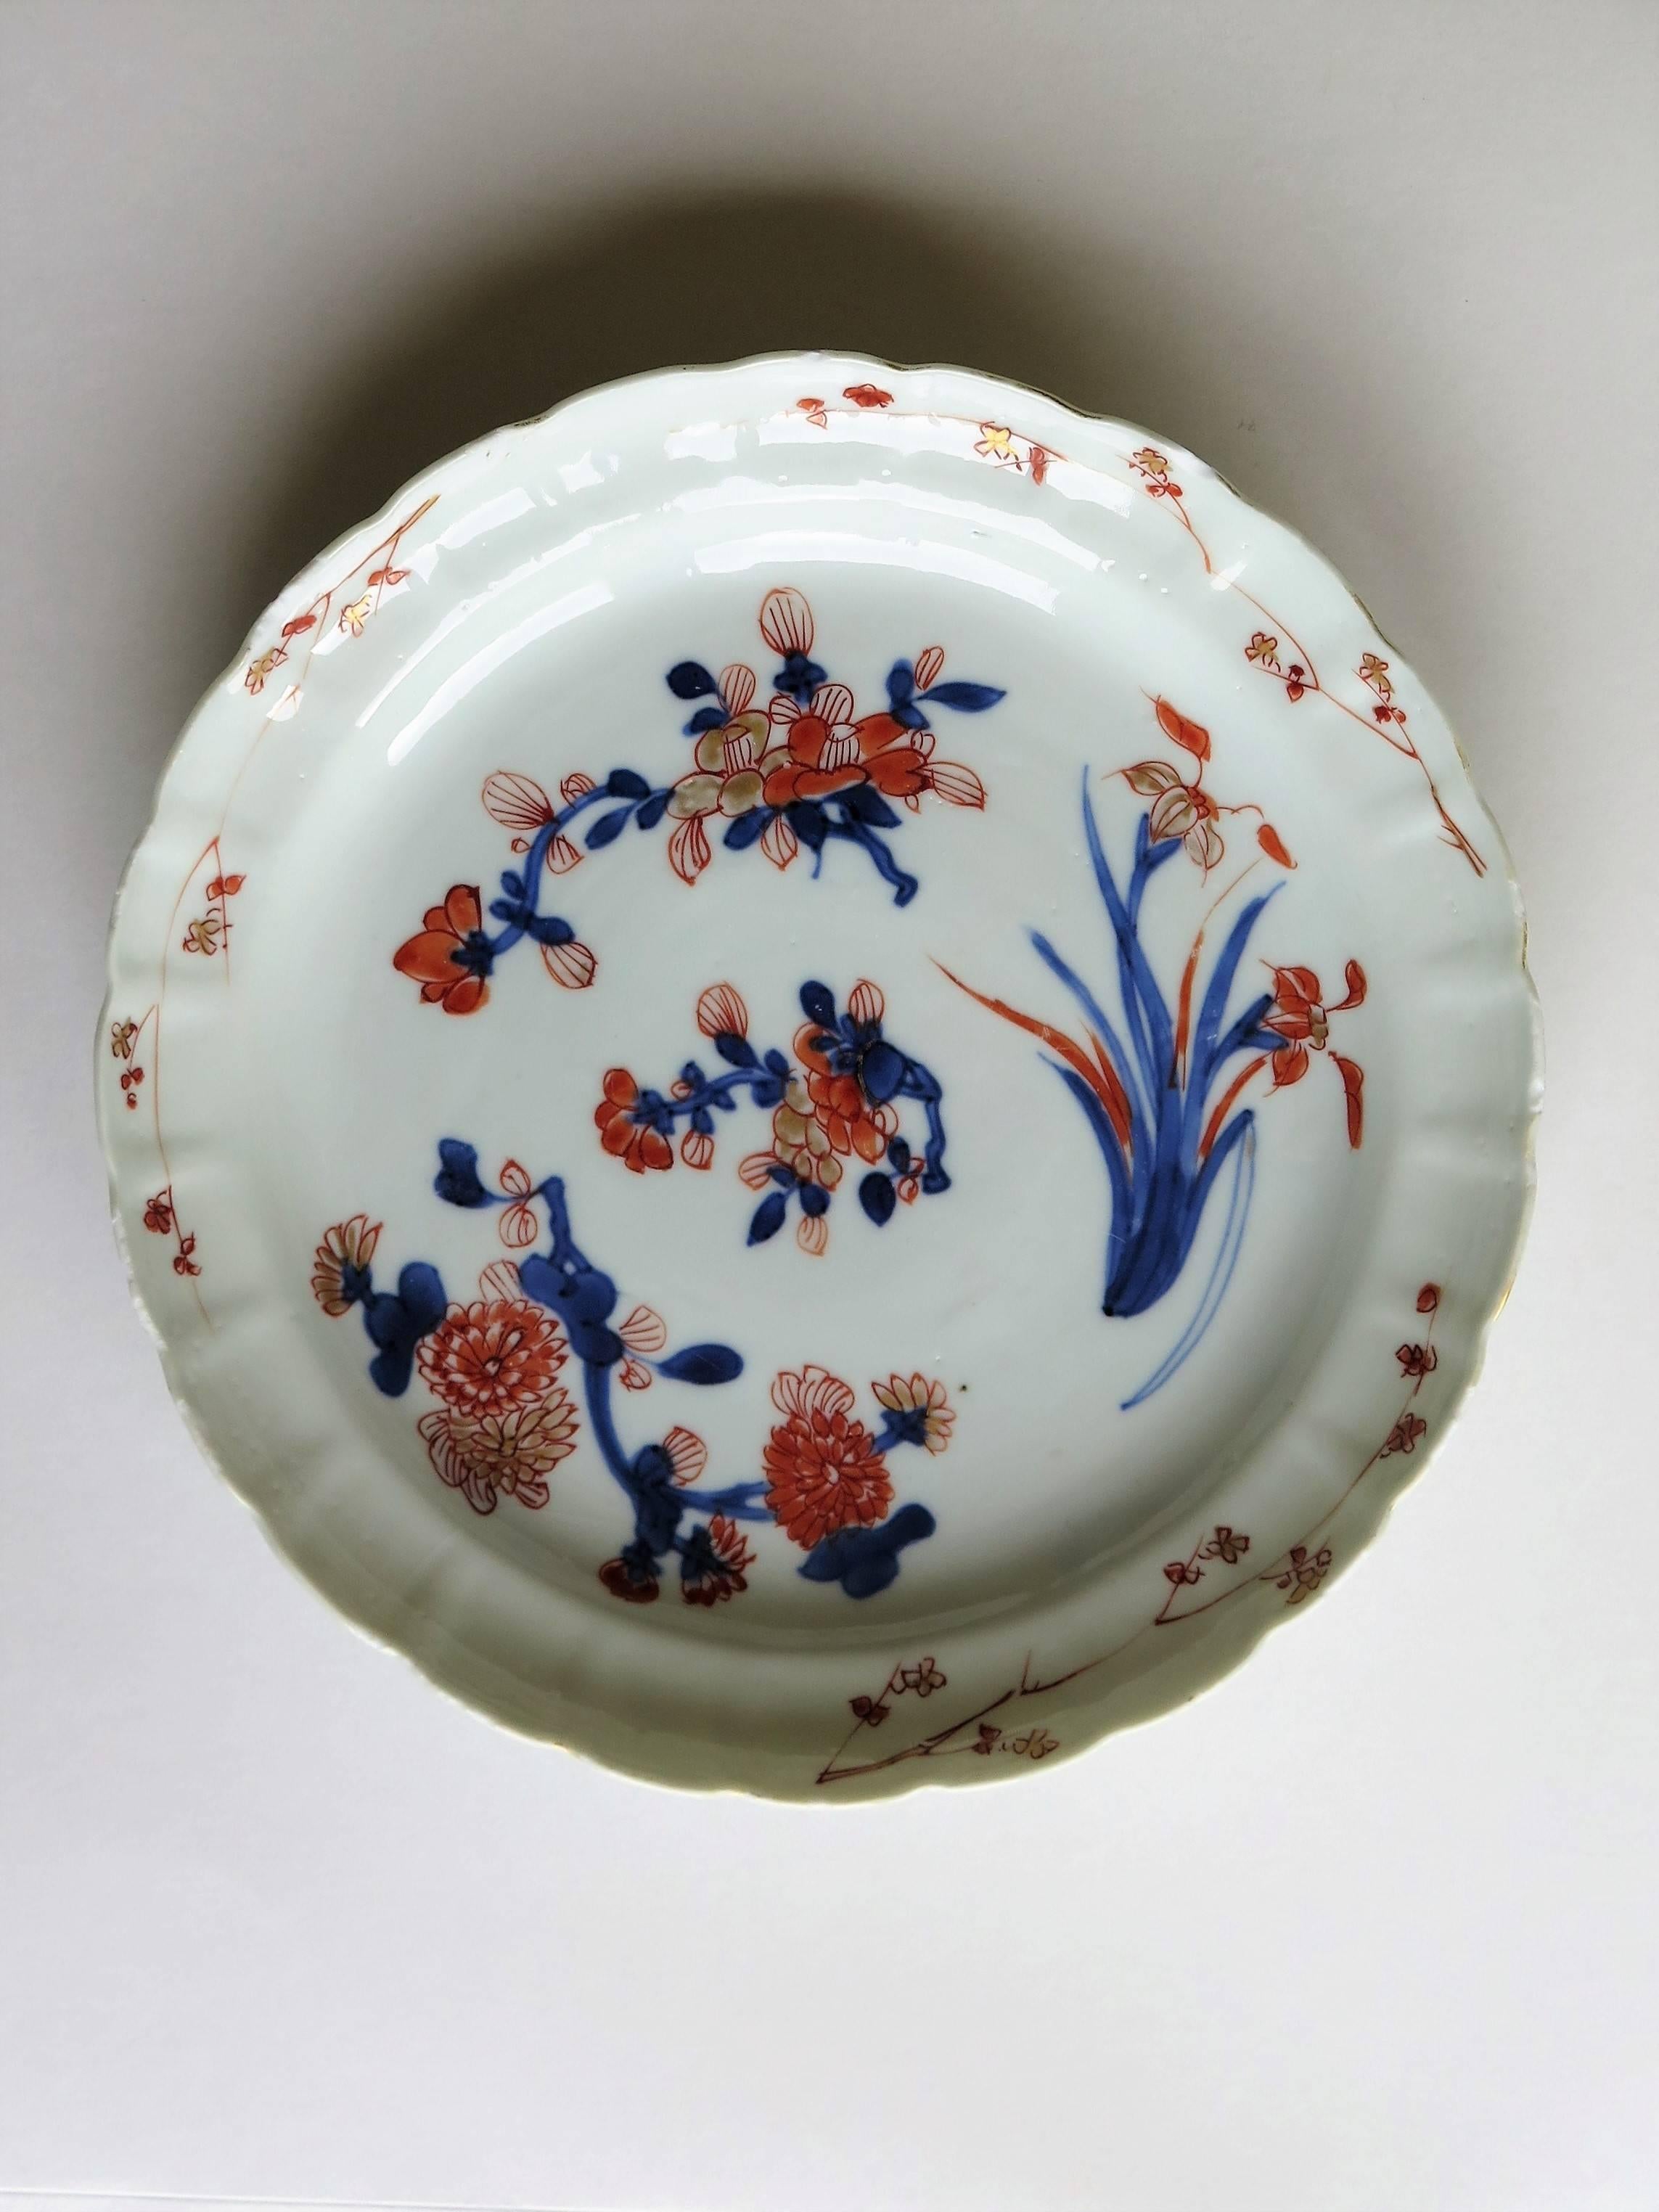 Qing Early 18th Century Chinese Porcelain Plate or Dish, Circa 1735